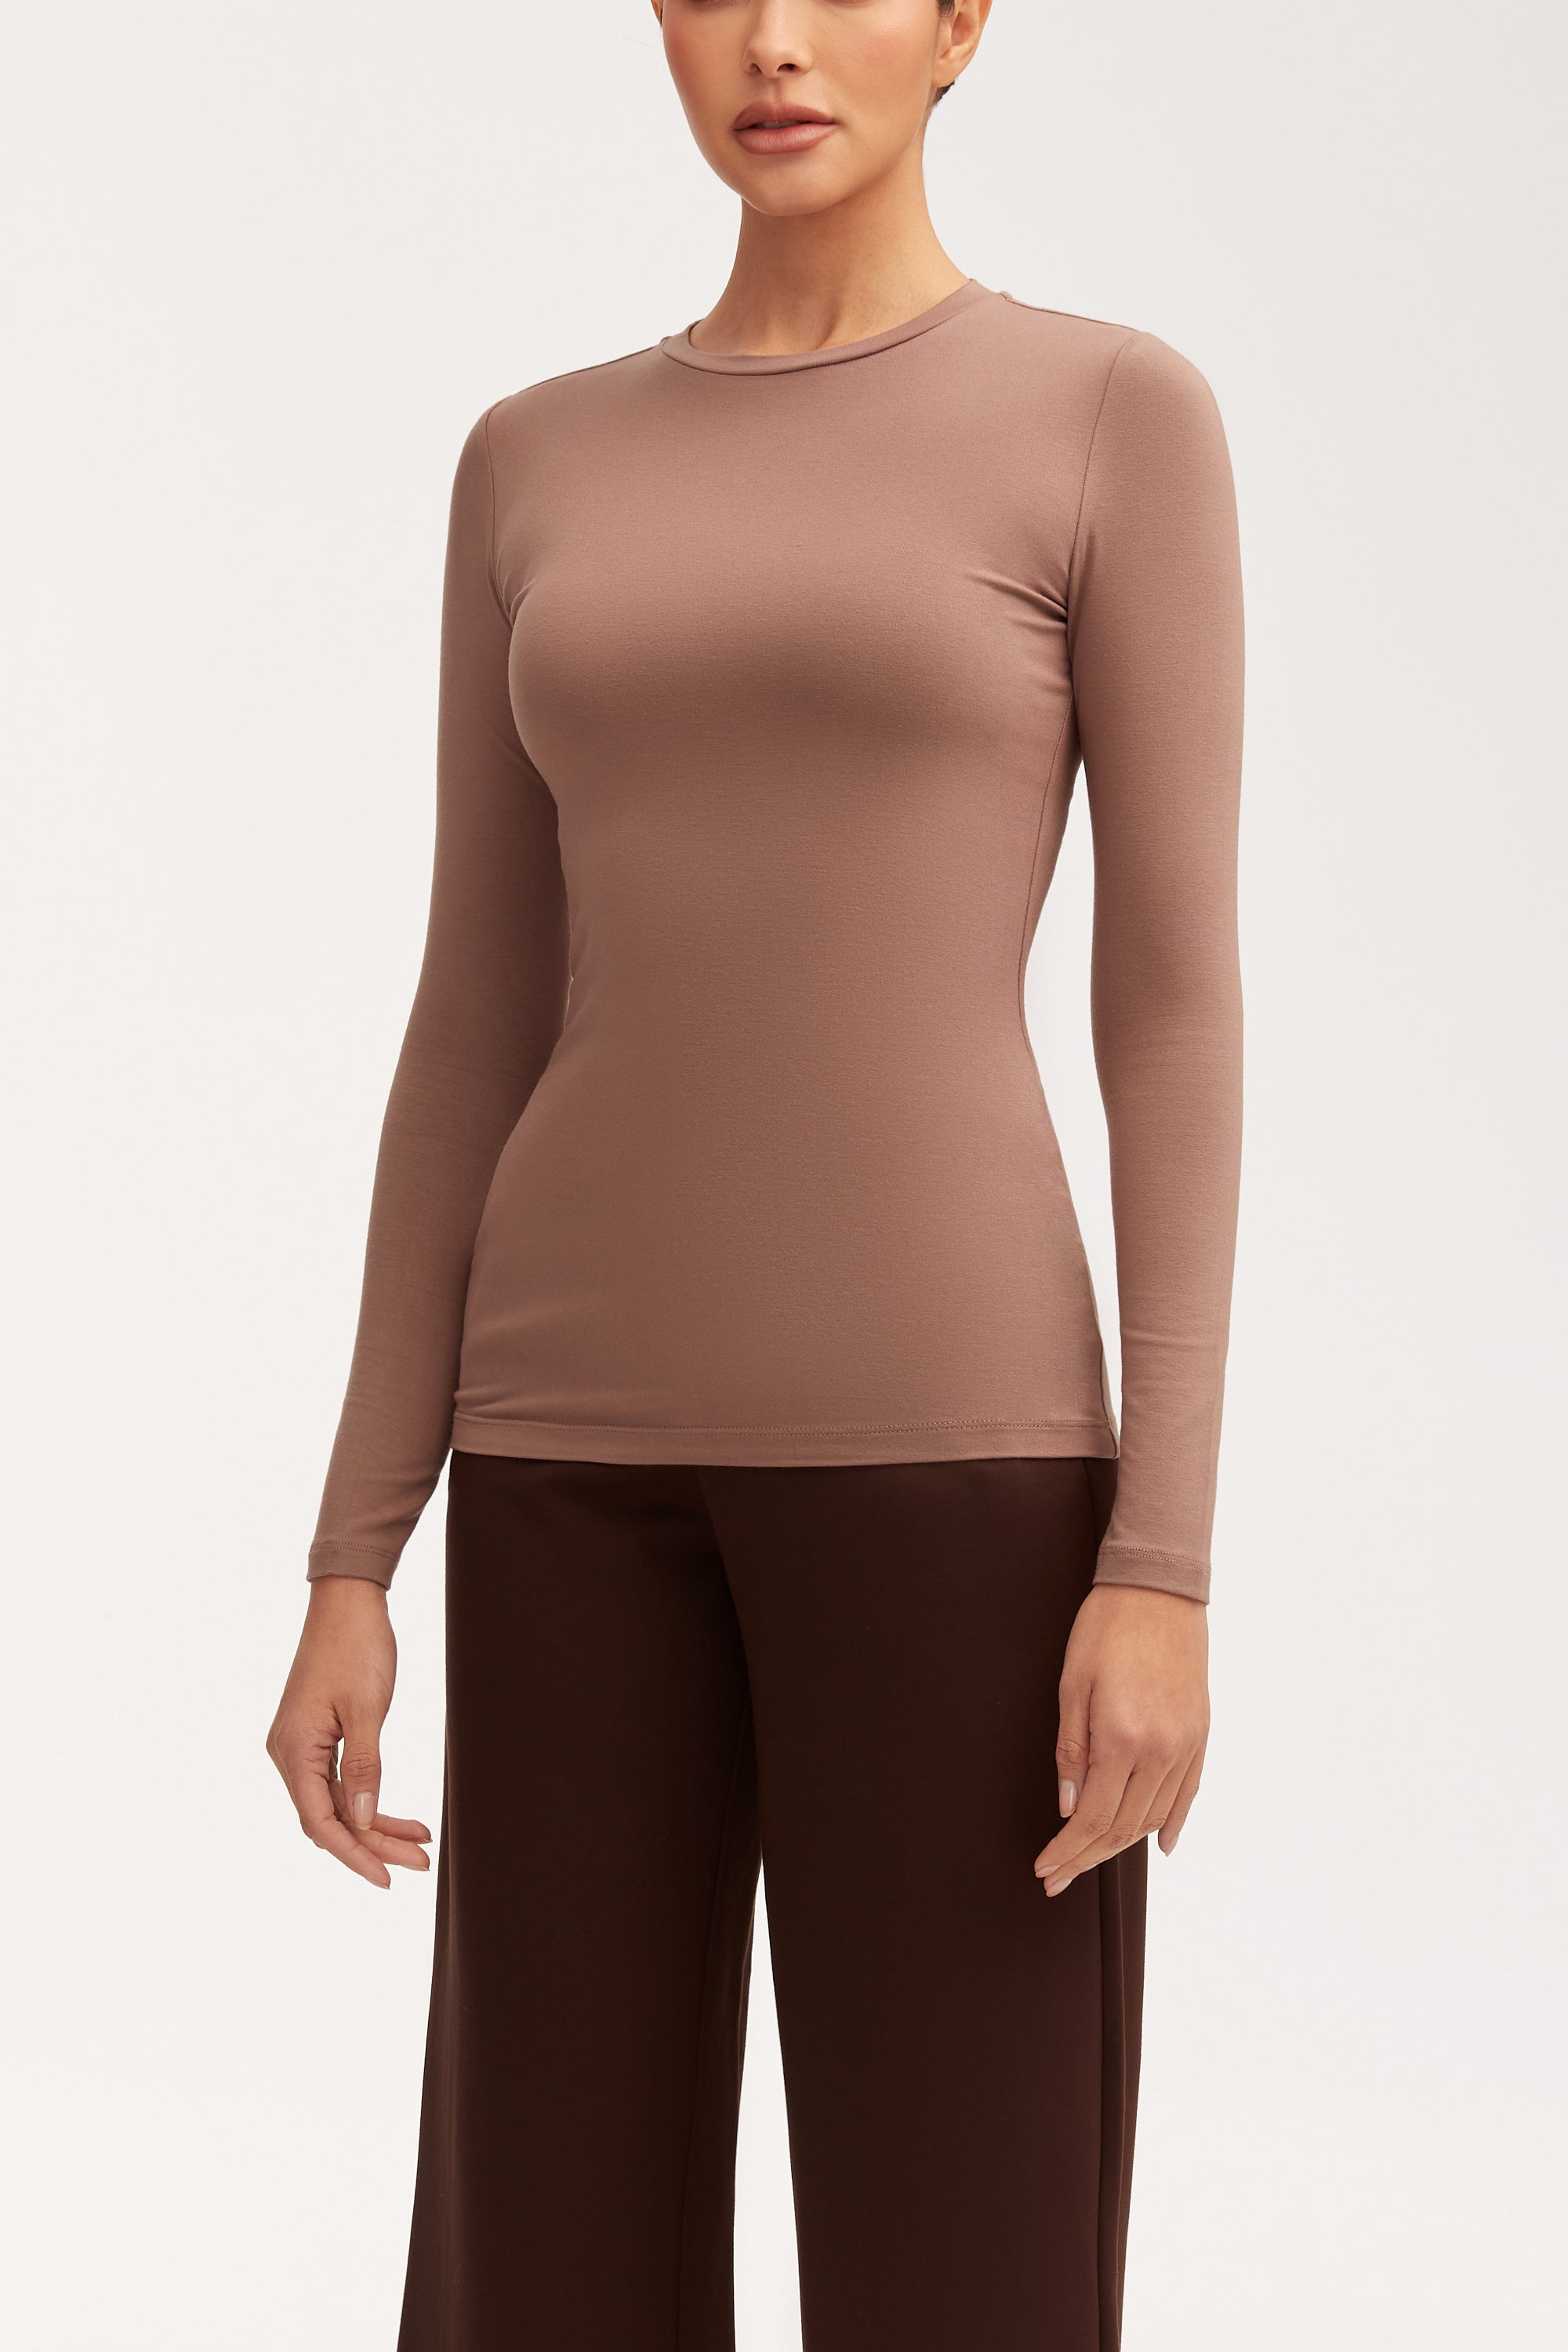 Essential Crew Neck Bamboo Jersey Top - Deep Taupe